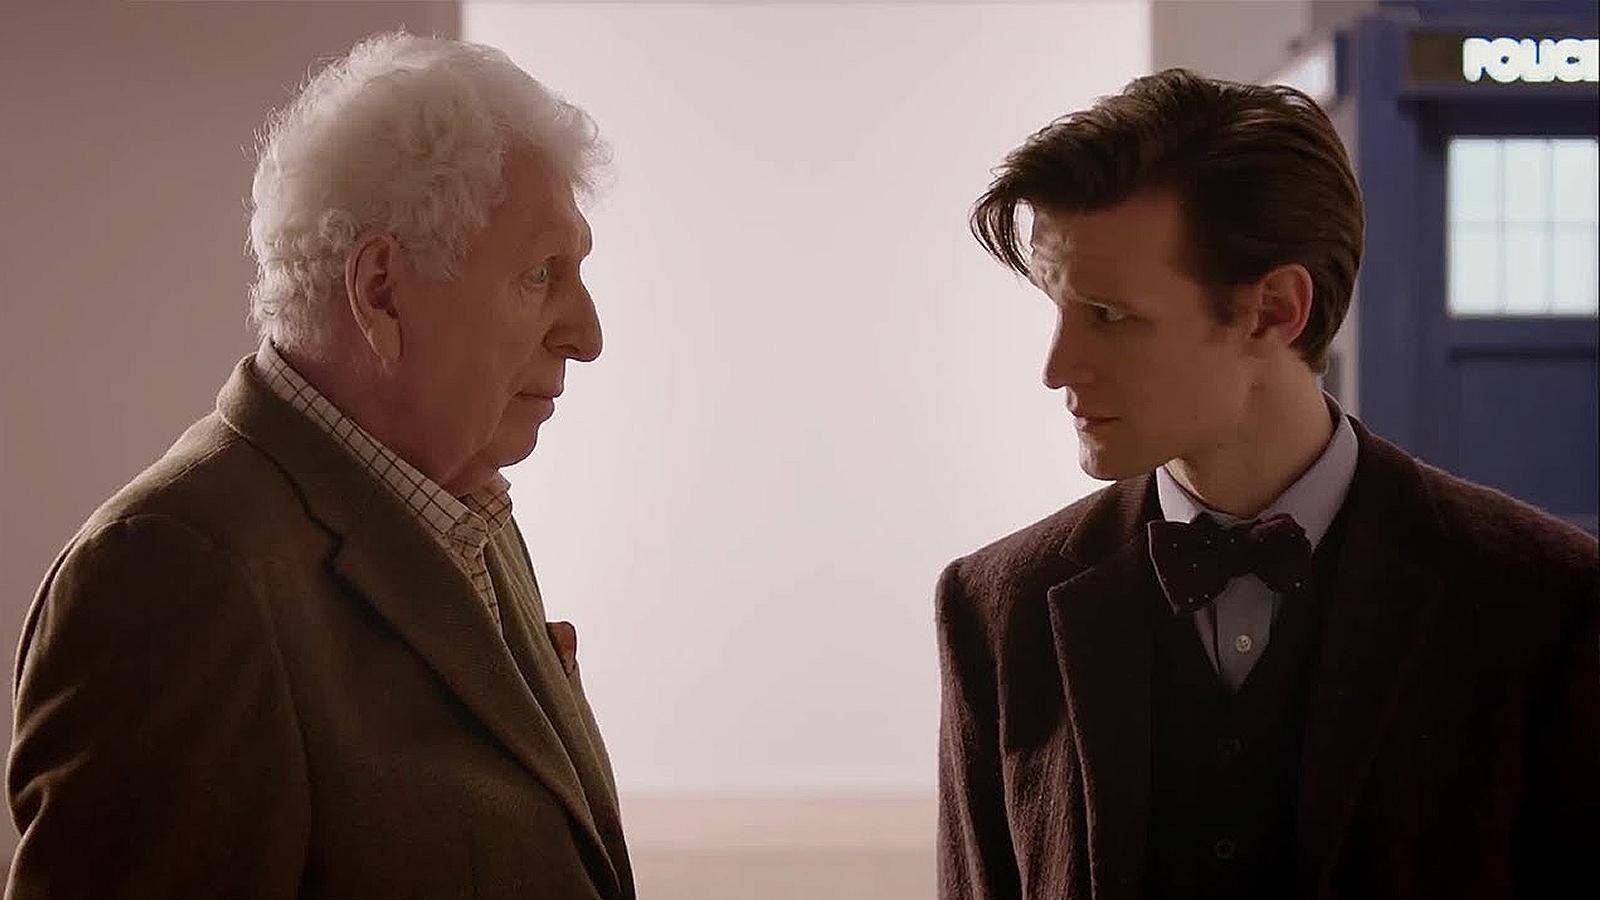 The Curator and the Eleventh Doctor in Doctor Who